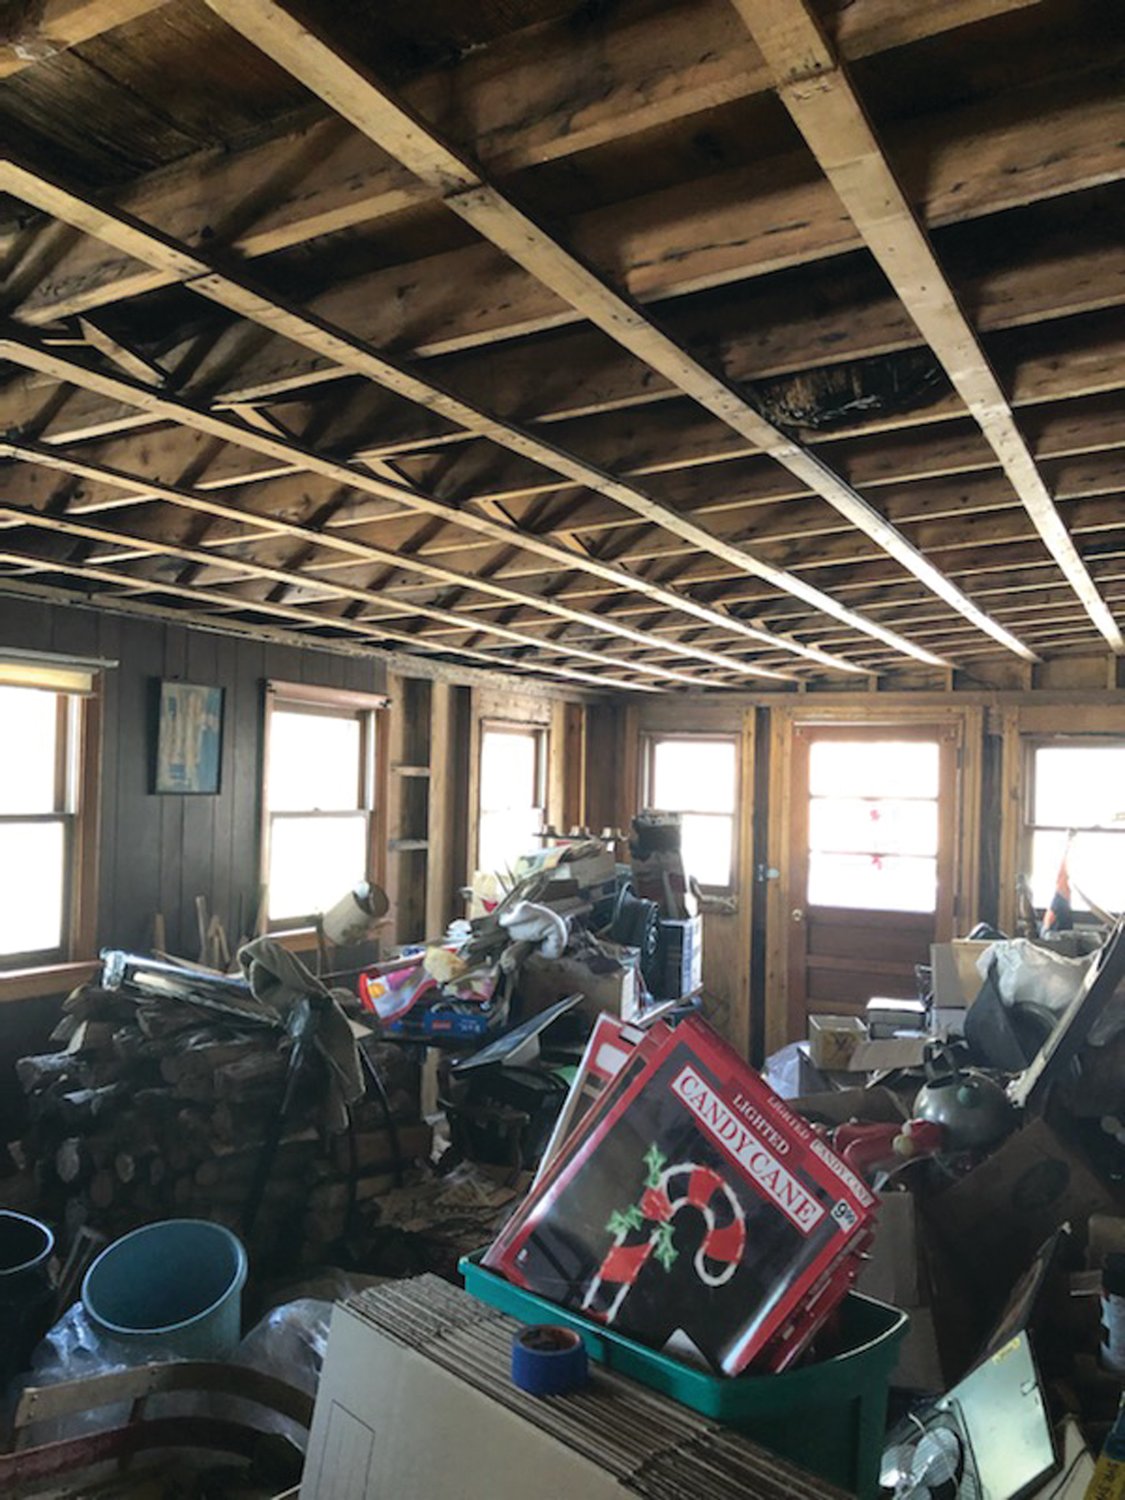 POST-STORM CHAOS: Last year, as his home of 60 years crumbled around him, 91-year-old Korean War veteran Bernie Pavia inspected the damage. The past year’s been rough, but the repairs are finally almost done and he’s back at home again.